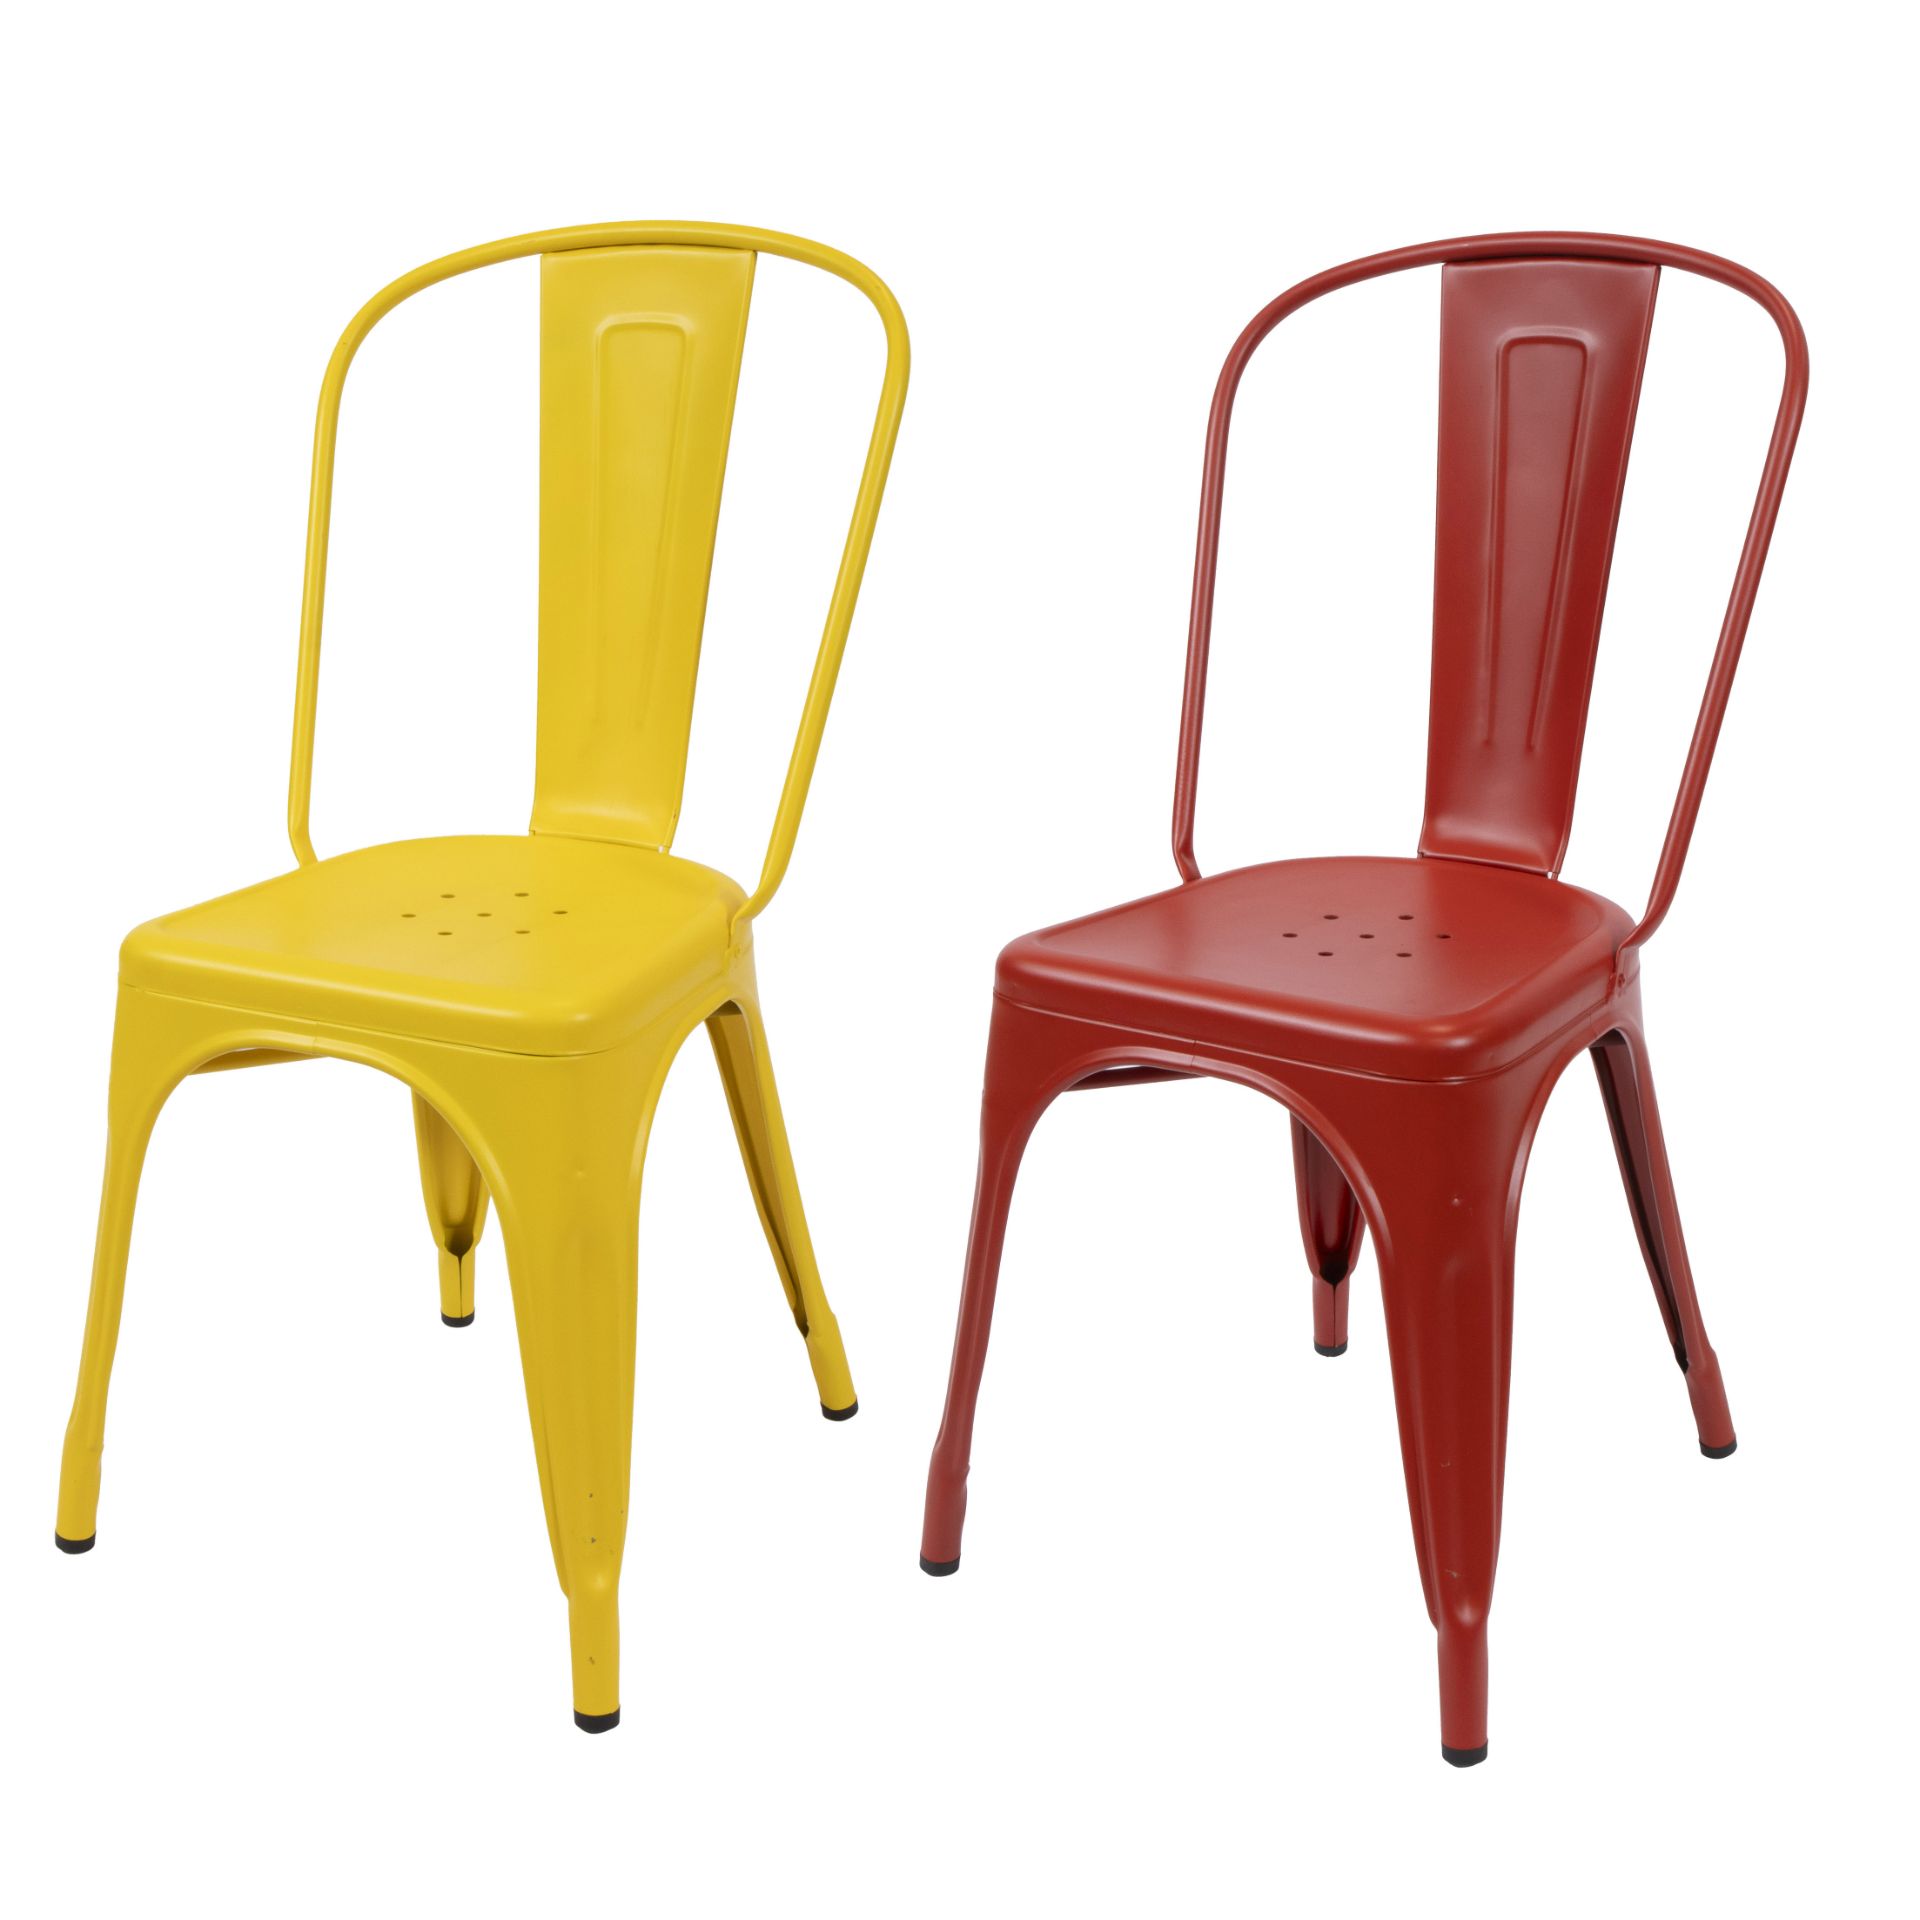 2 original Tolix chairs, yellow and red, les couleurs Le Corbusier, marked